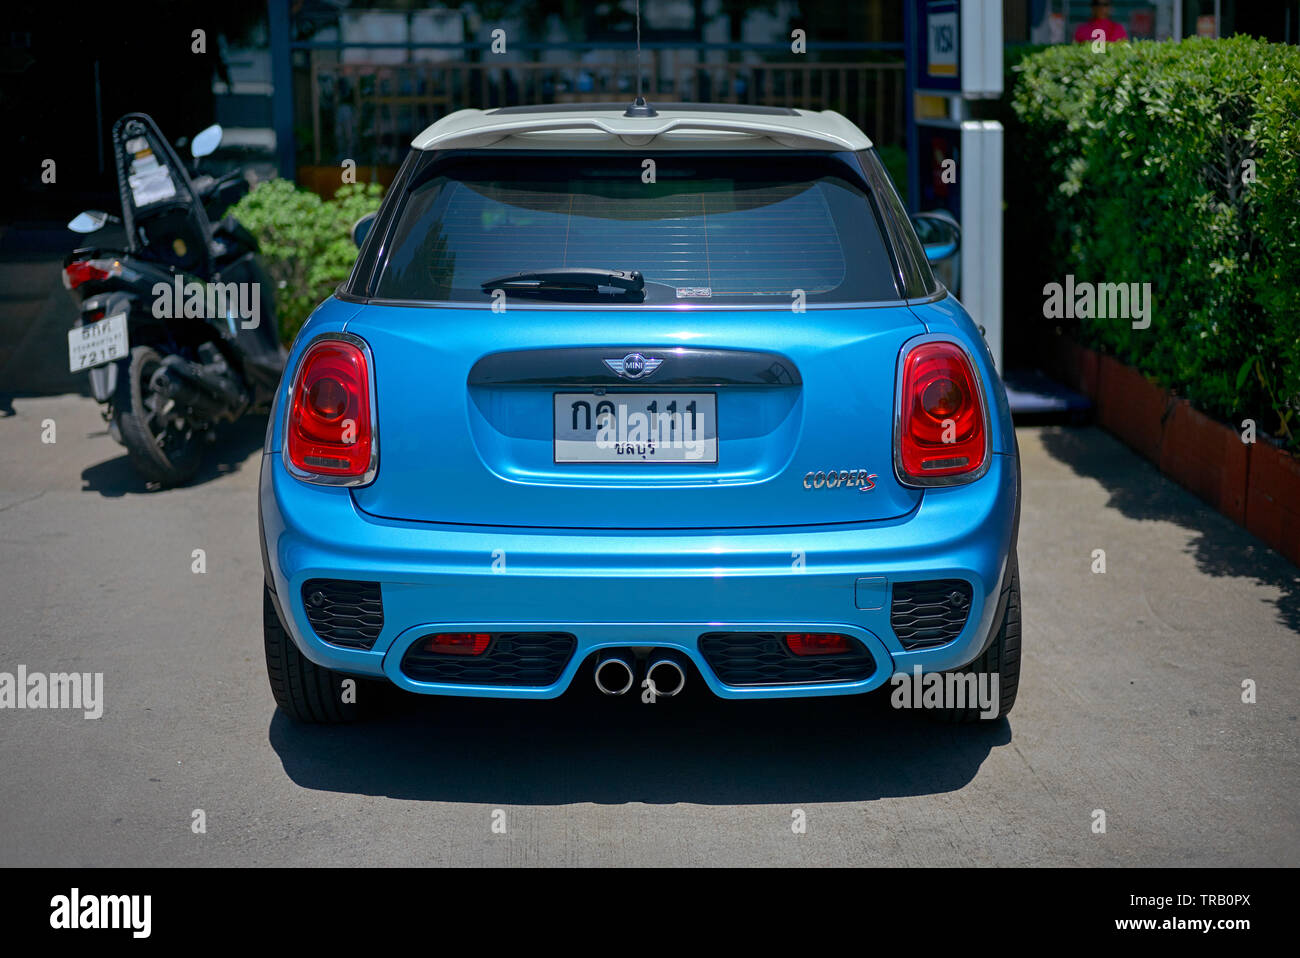 Mini Cooper S in blue with Thailand  Number plate 111 Stock Photo